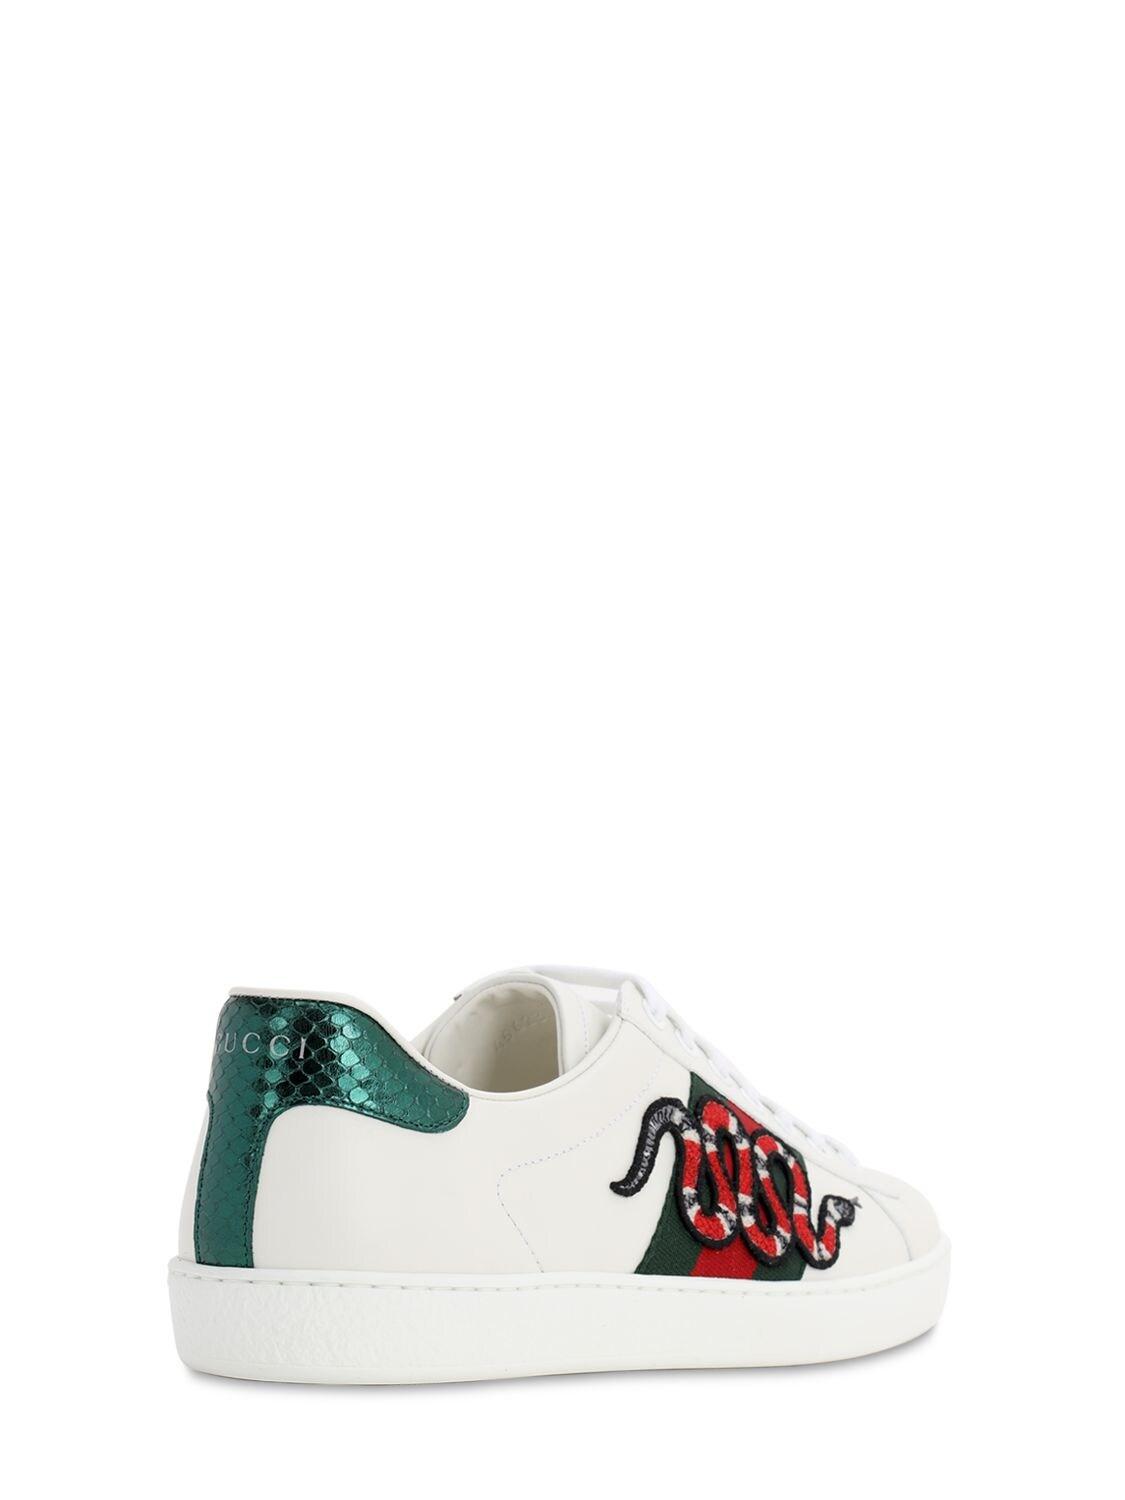 gucci sneakers white snake